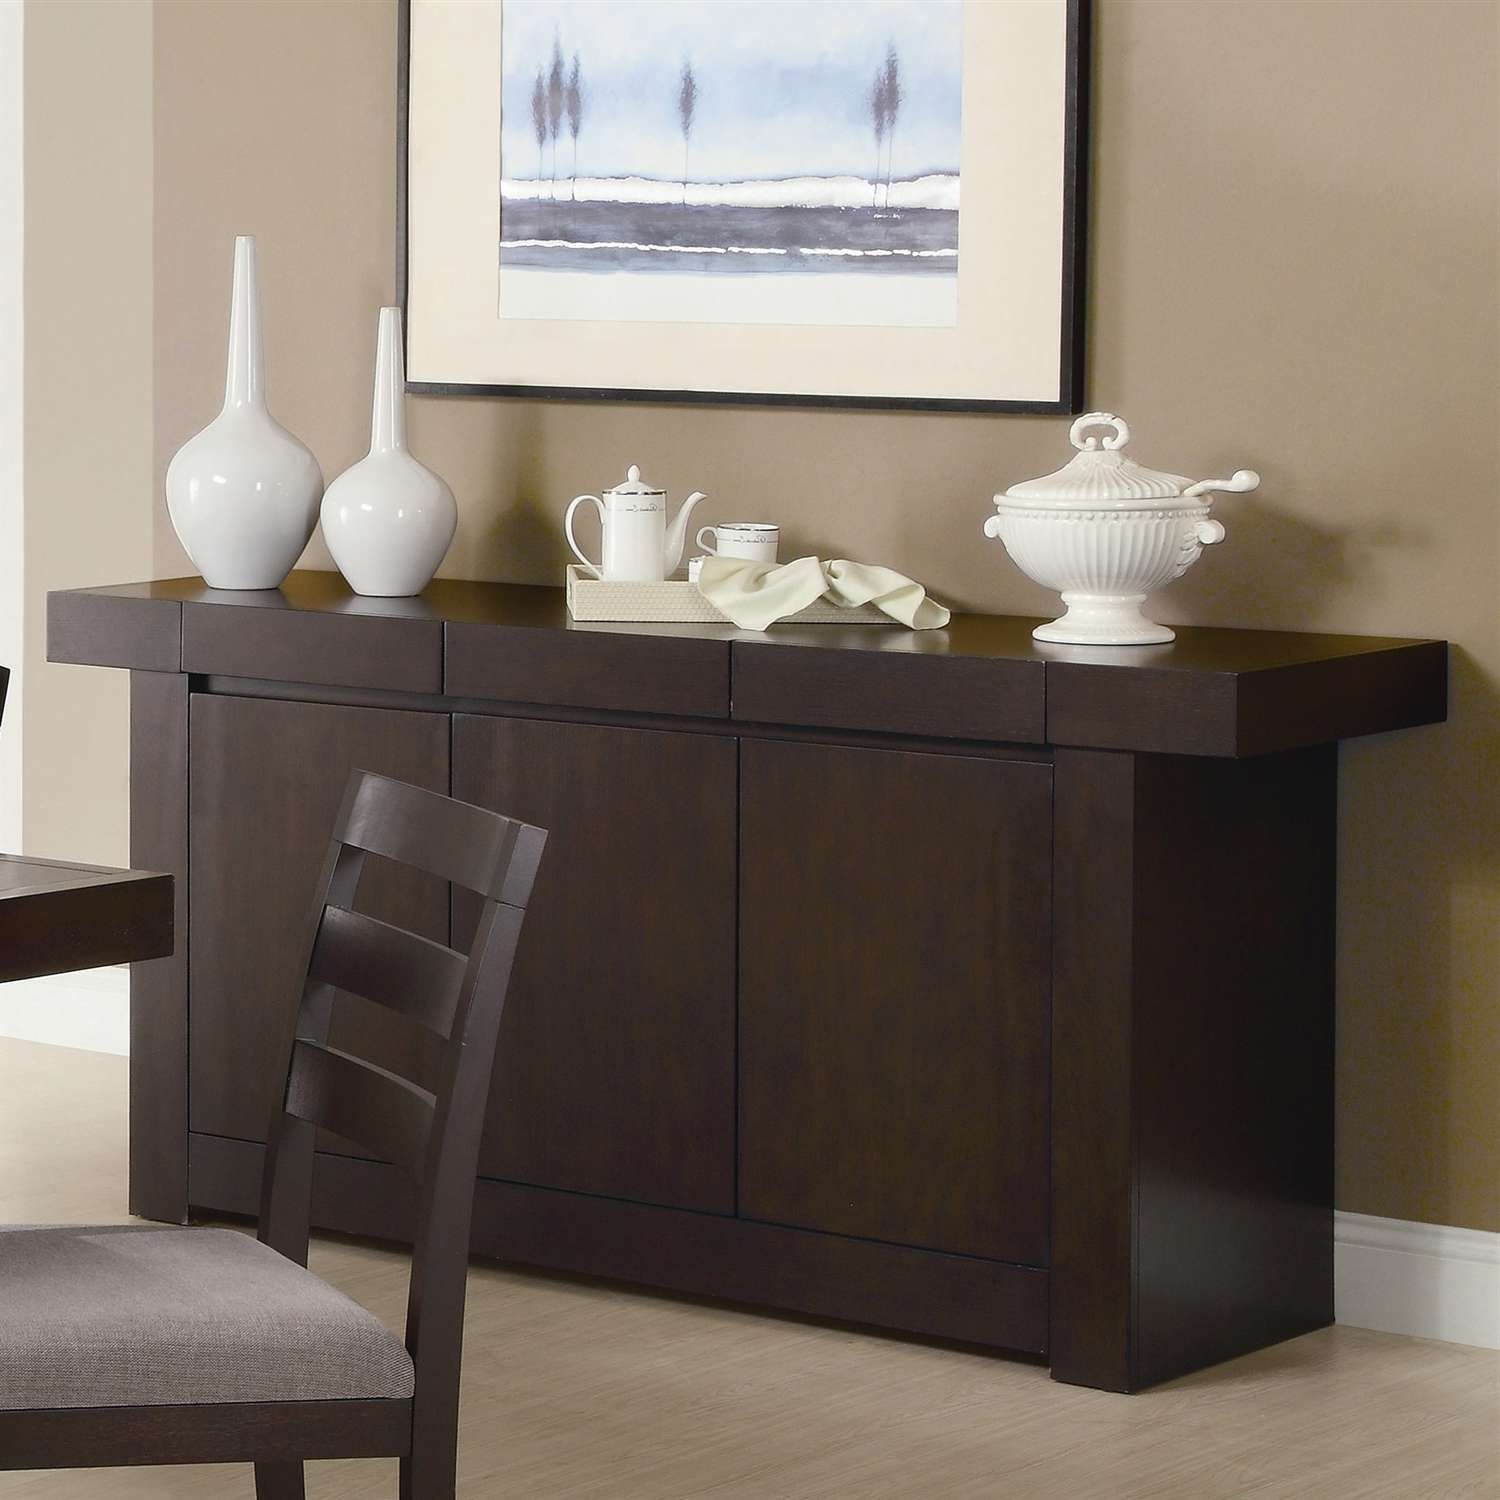 Sideboards And Buffets Modern Contemporary Dining Room Buffets And Intended For Dining Room Sideboards (View 12 of 20)